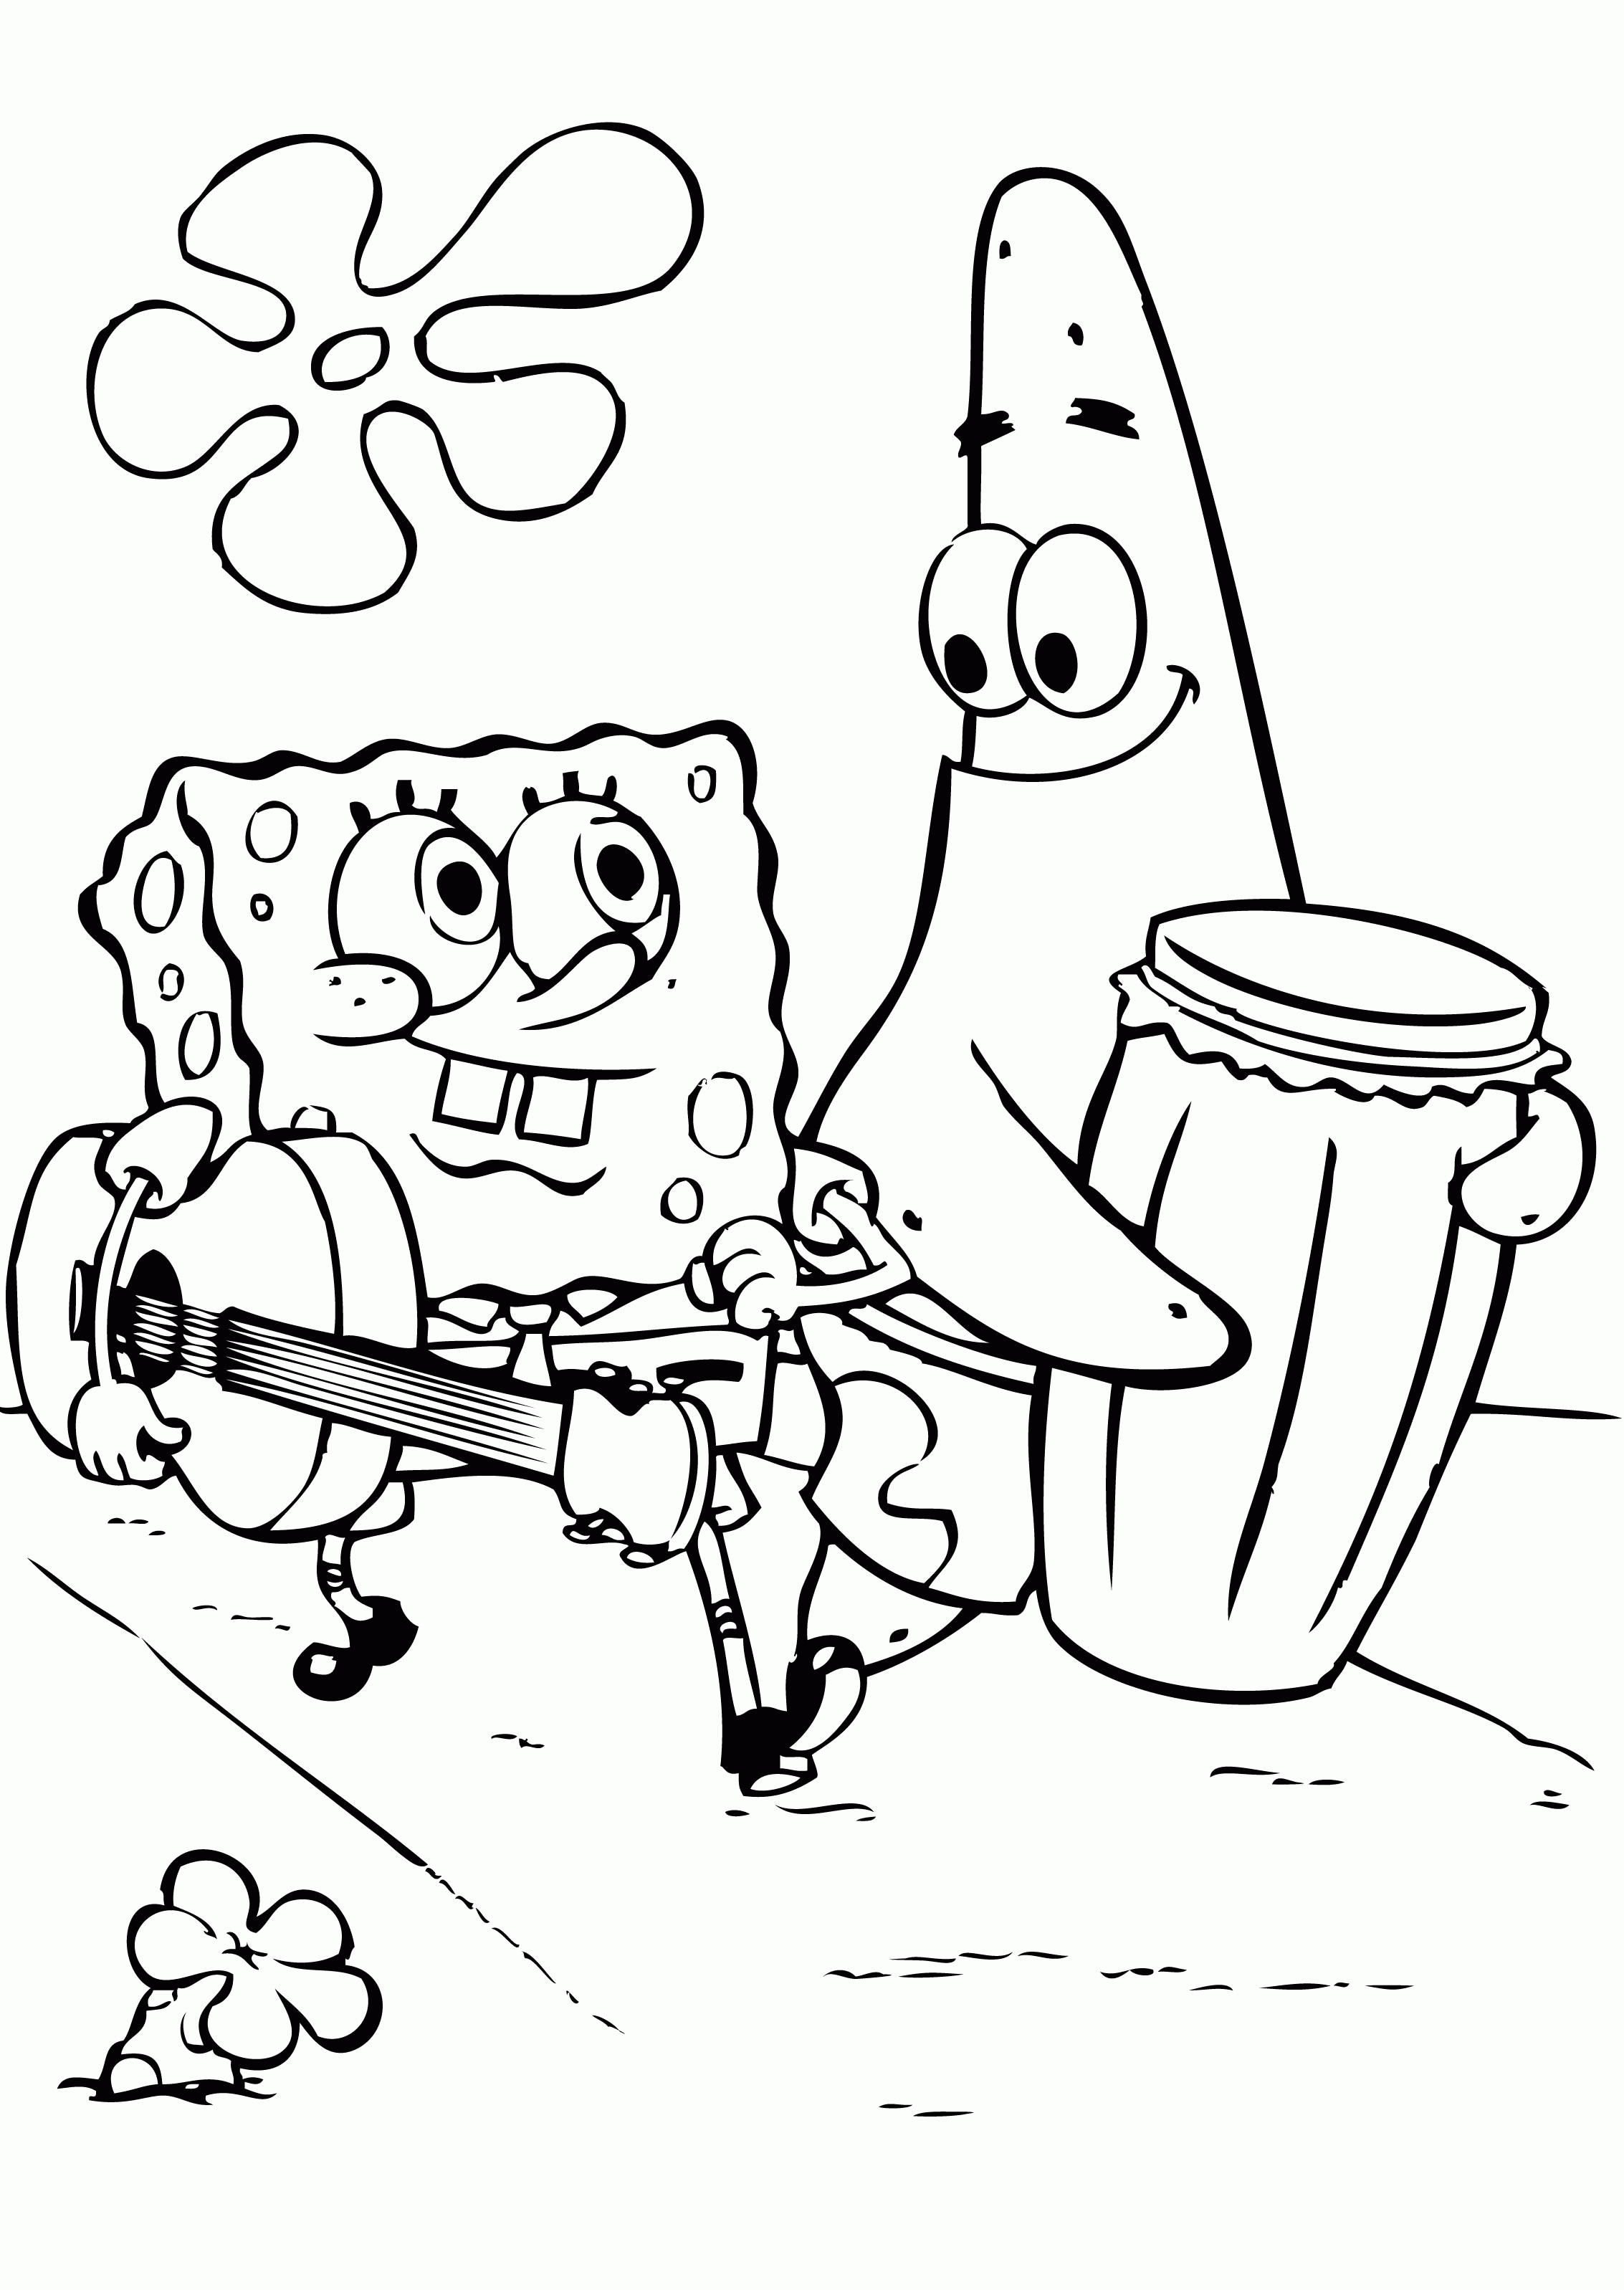 Easier Spongebob And Patrick Coloring - Coloring Pages